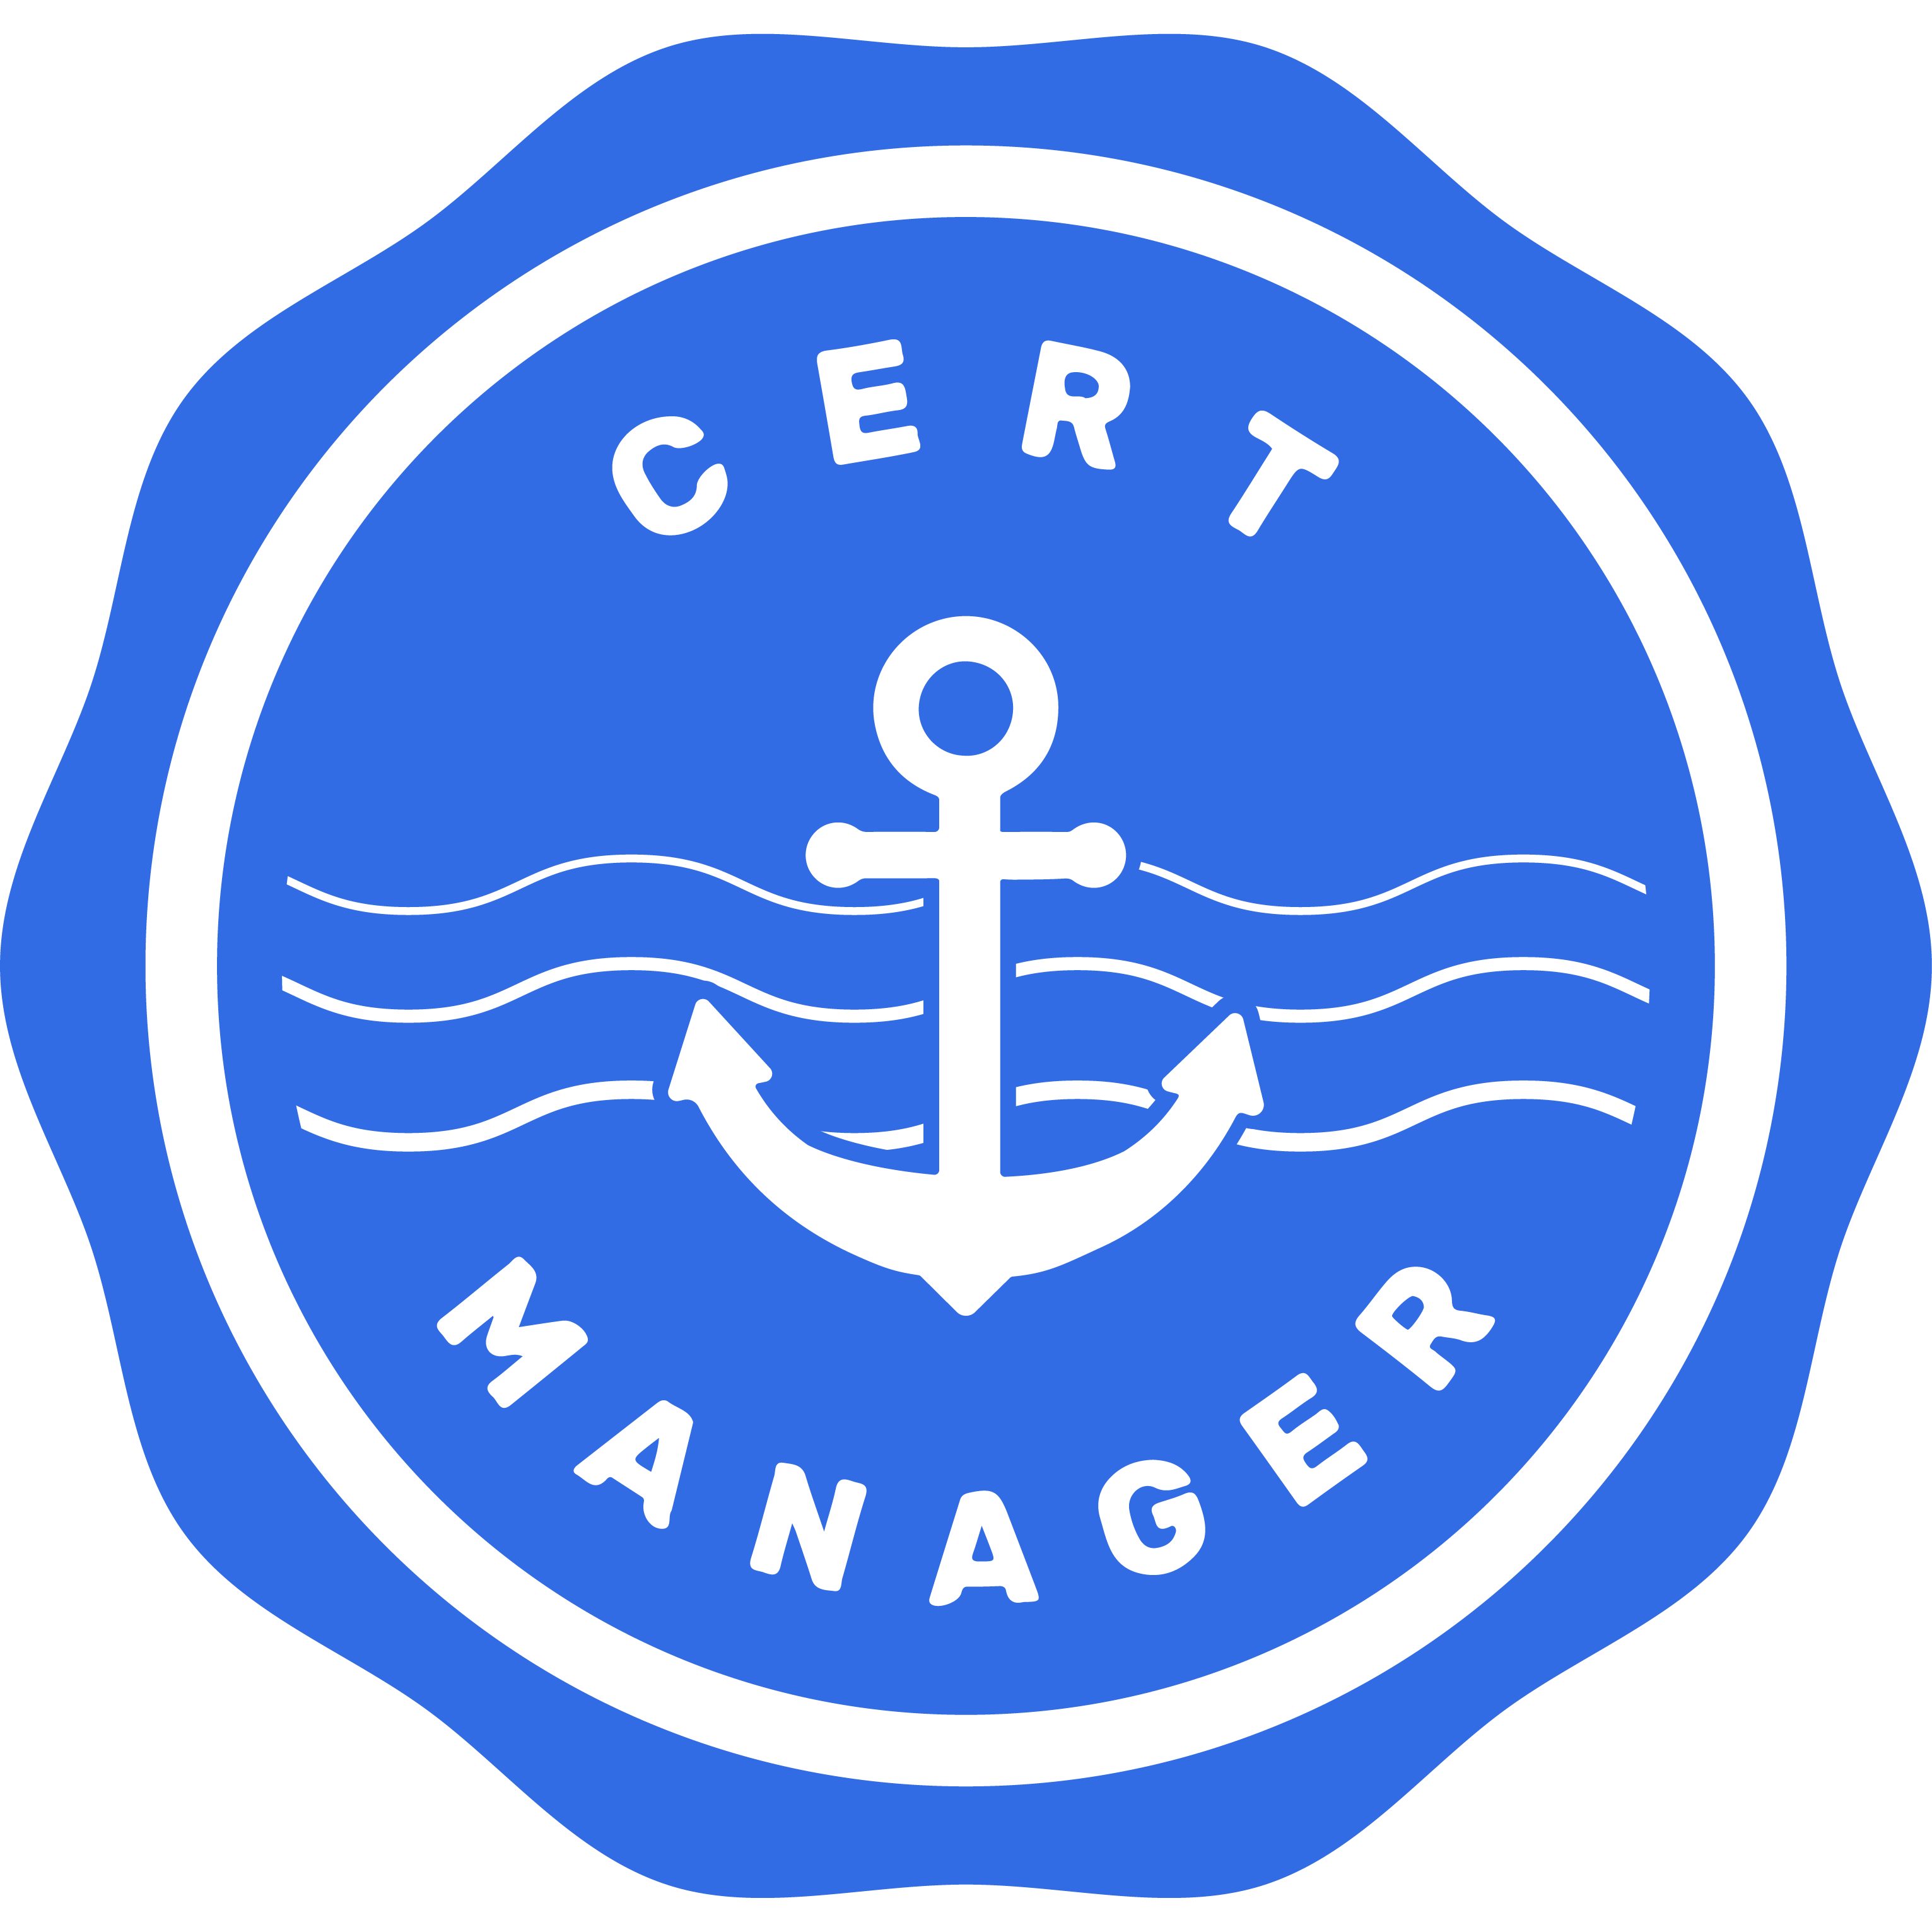 cert-manager project logo